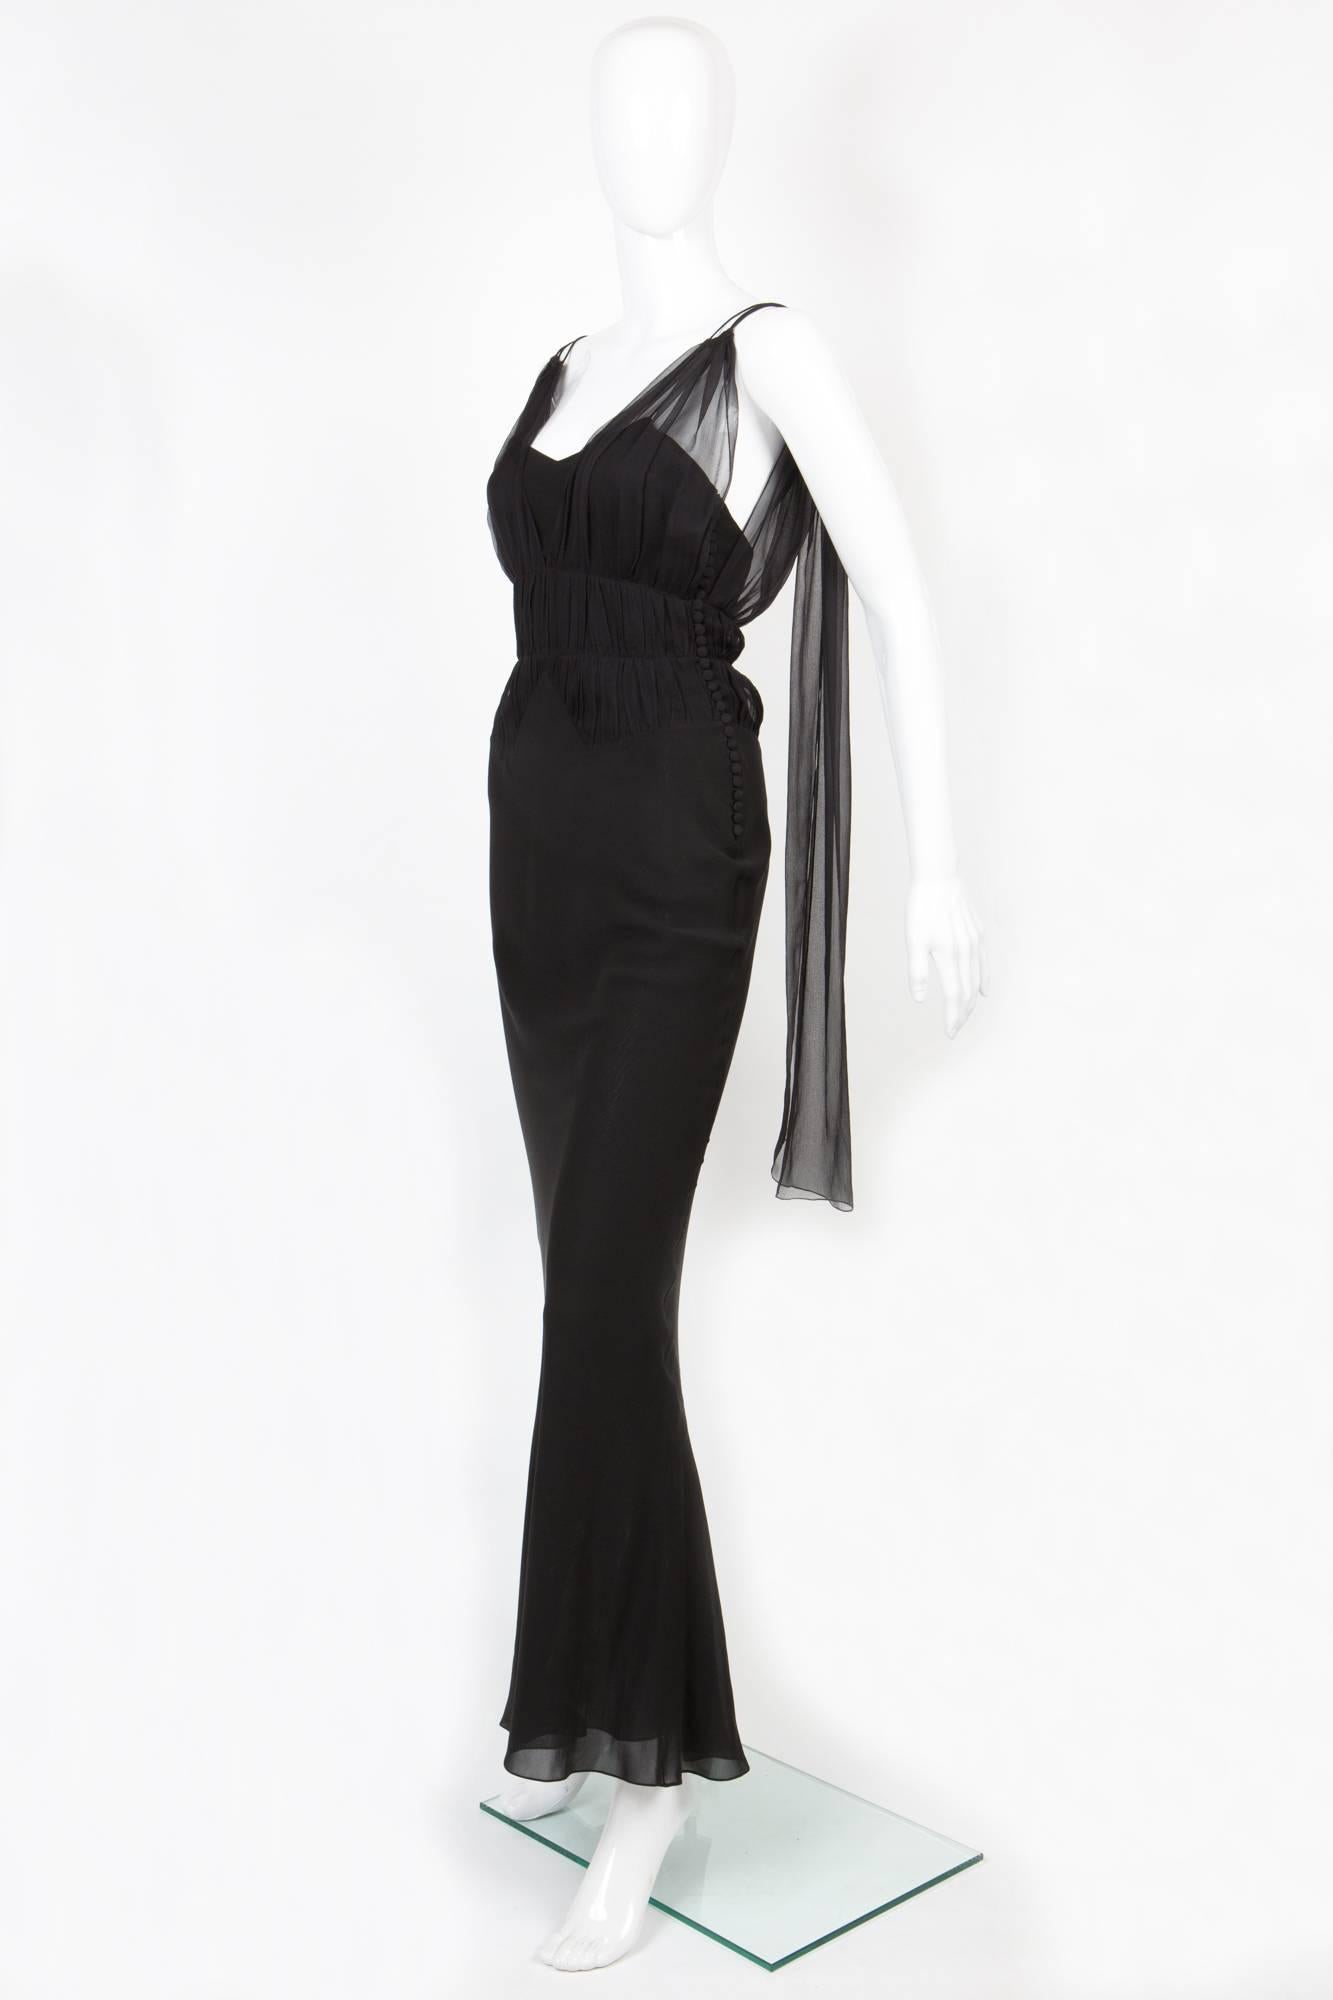 Christian Dior by Jonh Galliano black silk draped evening dress featuring a v-neck, spaghetti straps, a deep V back, a fitted silhouette, a flared skirt and a long length. 
In excellent vintage condition. Made in France.
Estimated size: 36fr
We